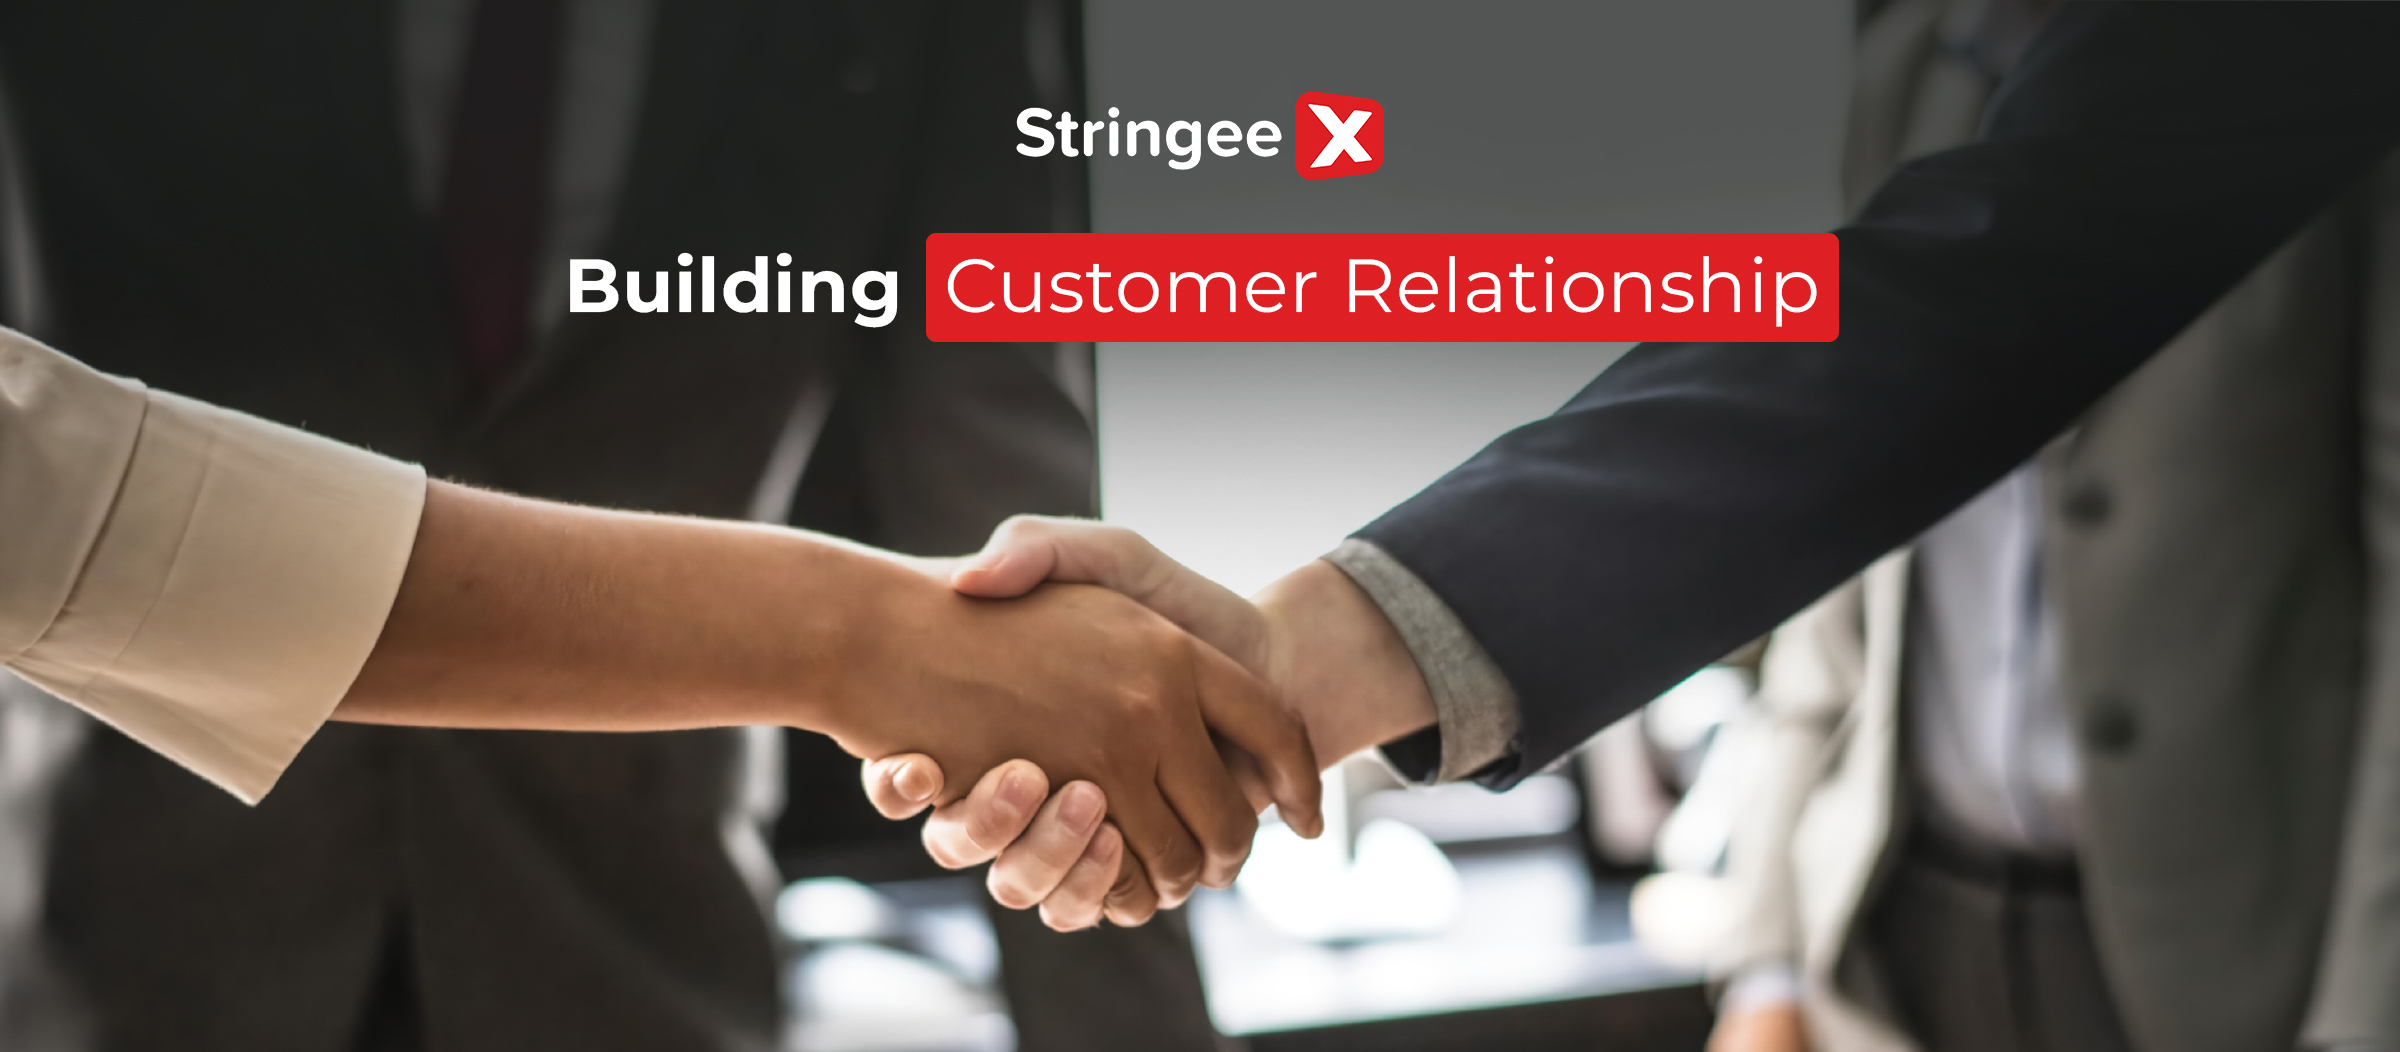 Building Customer Relationship: Our Solution For Call Center Agents